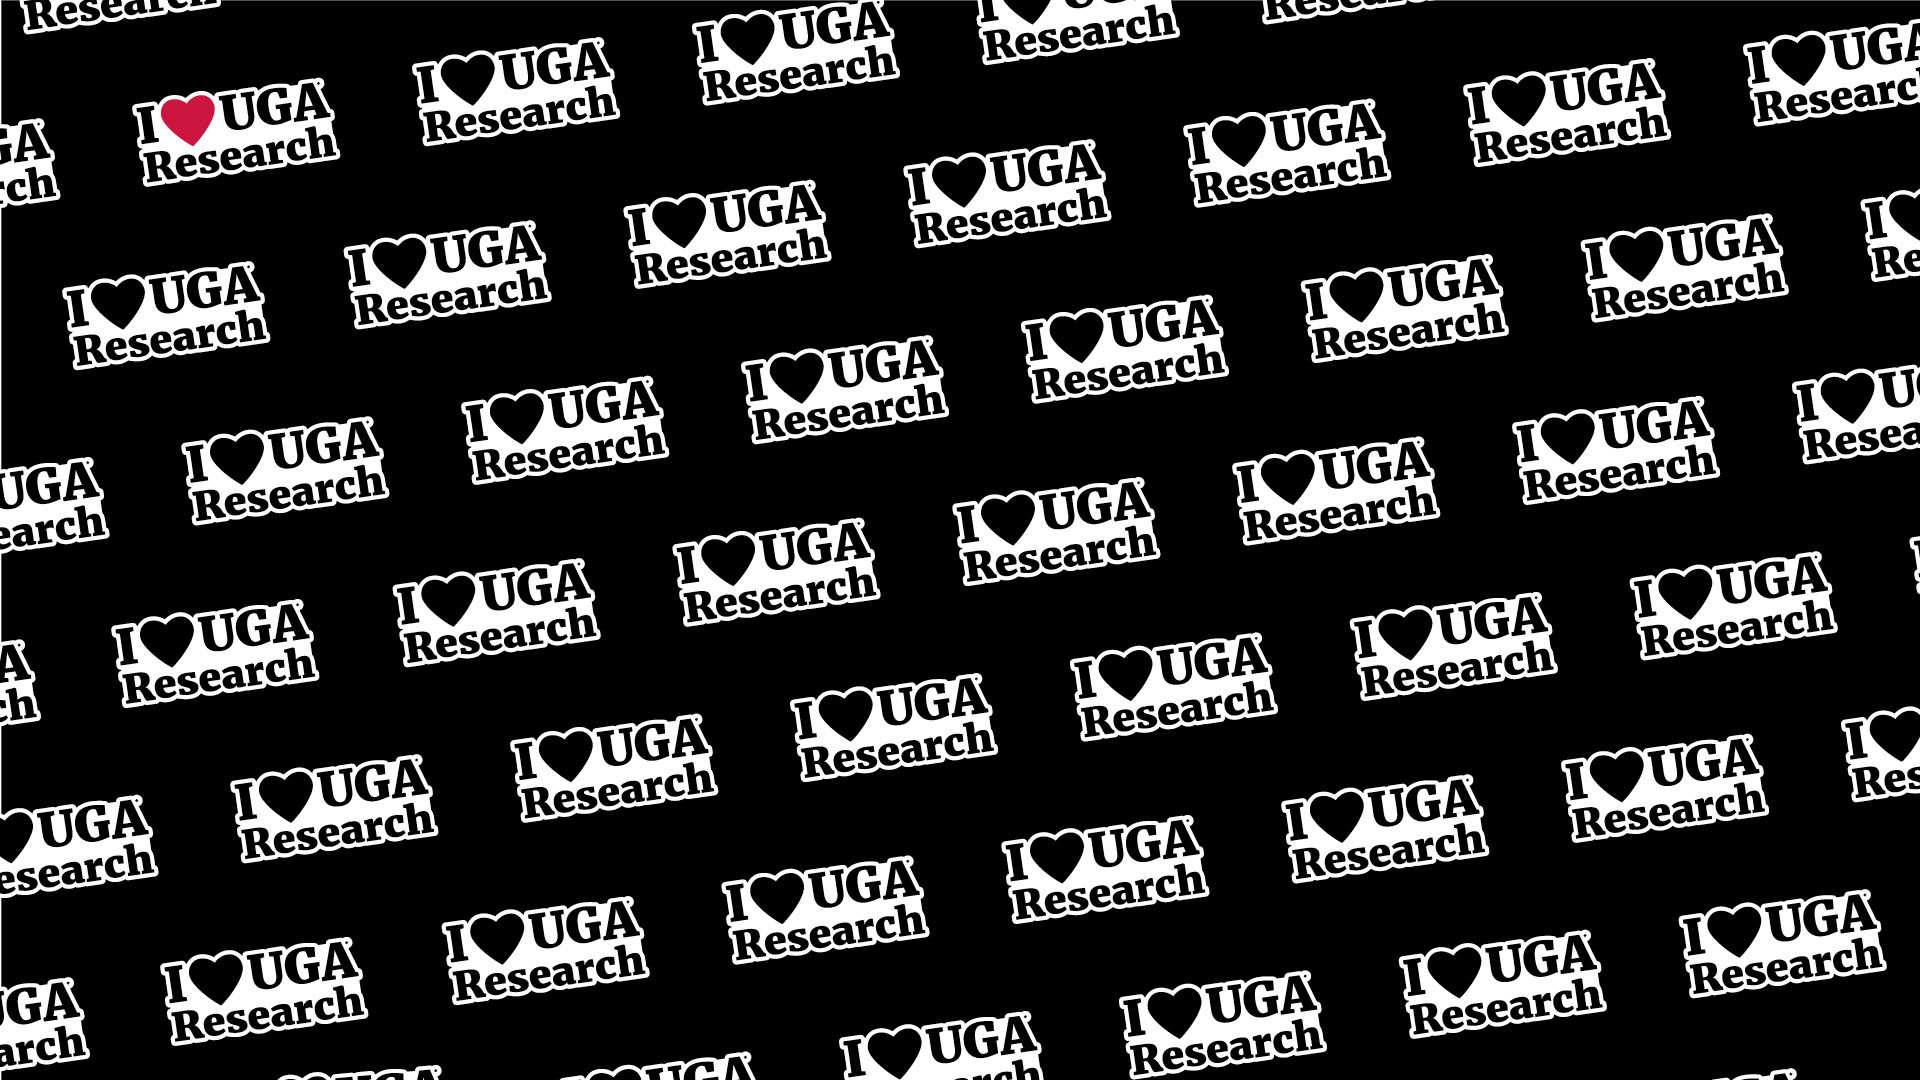 Step and repeat banner of I love UGA Research